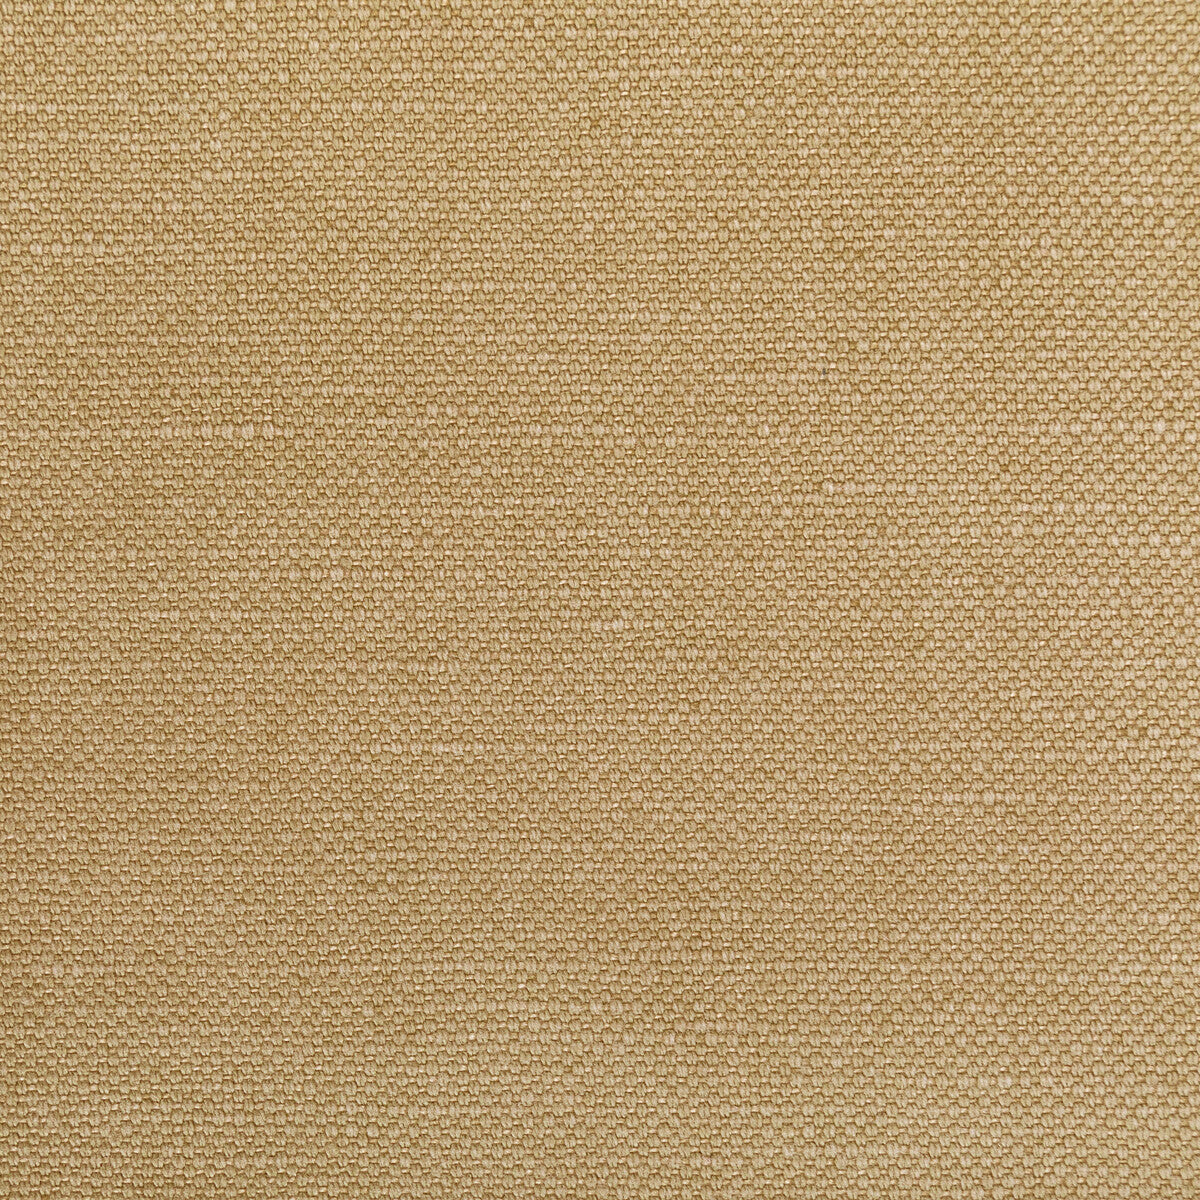 Carson fabric in almond color - pattern 36282.1616.0 - by Kravet Basics